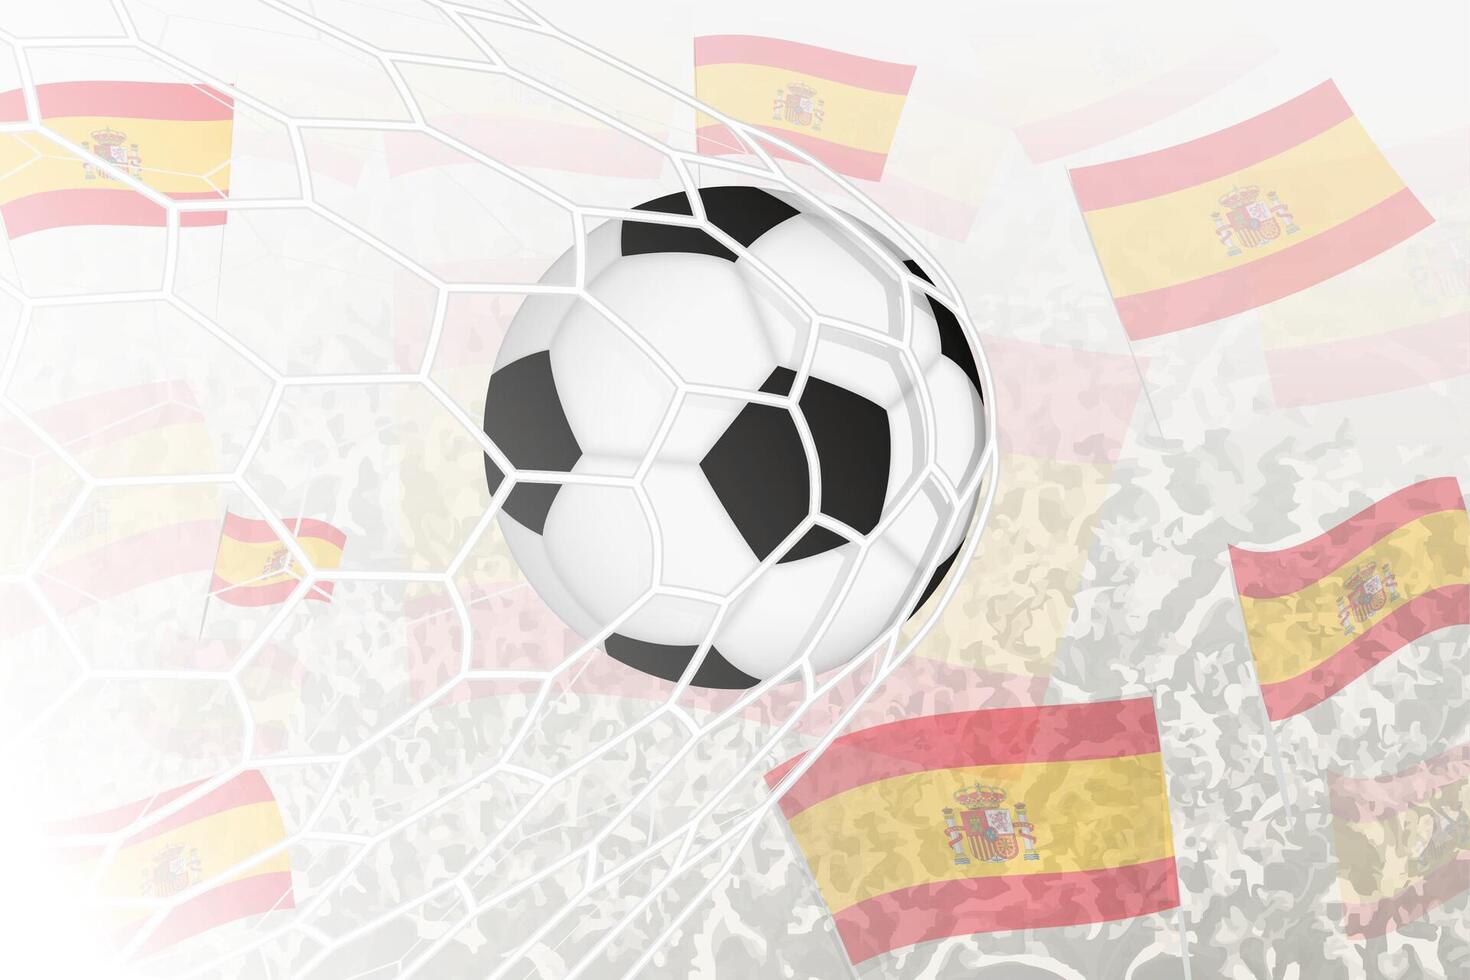 National Football team of Spain scored goal. Ball in goal net, while football supporters are waving the Spain flag in the background. vector